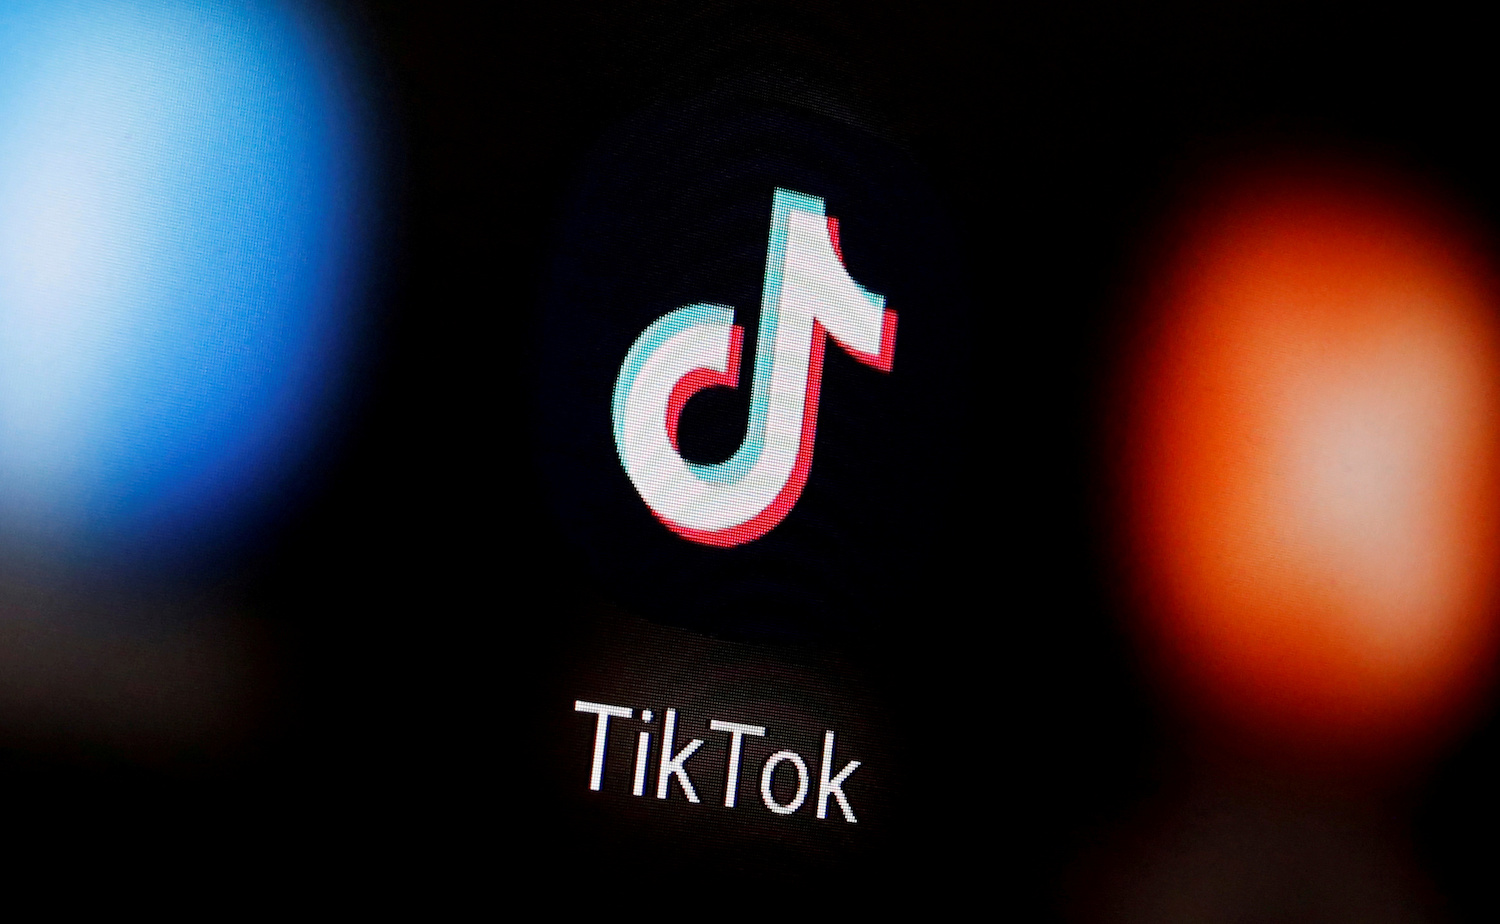 Pakistan blocks TikTok for ‘immoral and indecent’ content